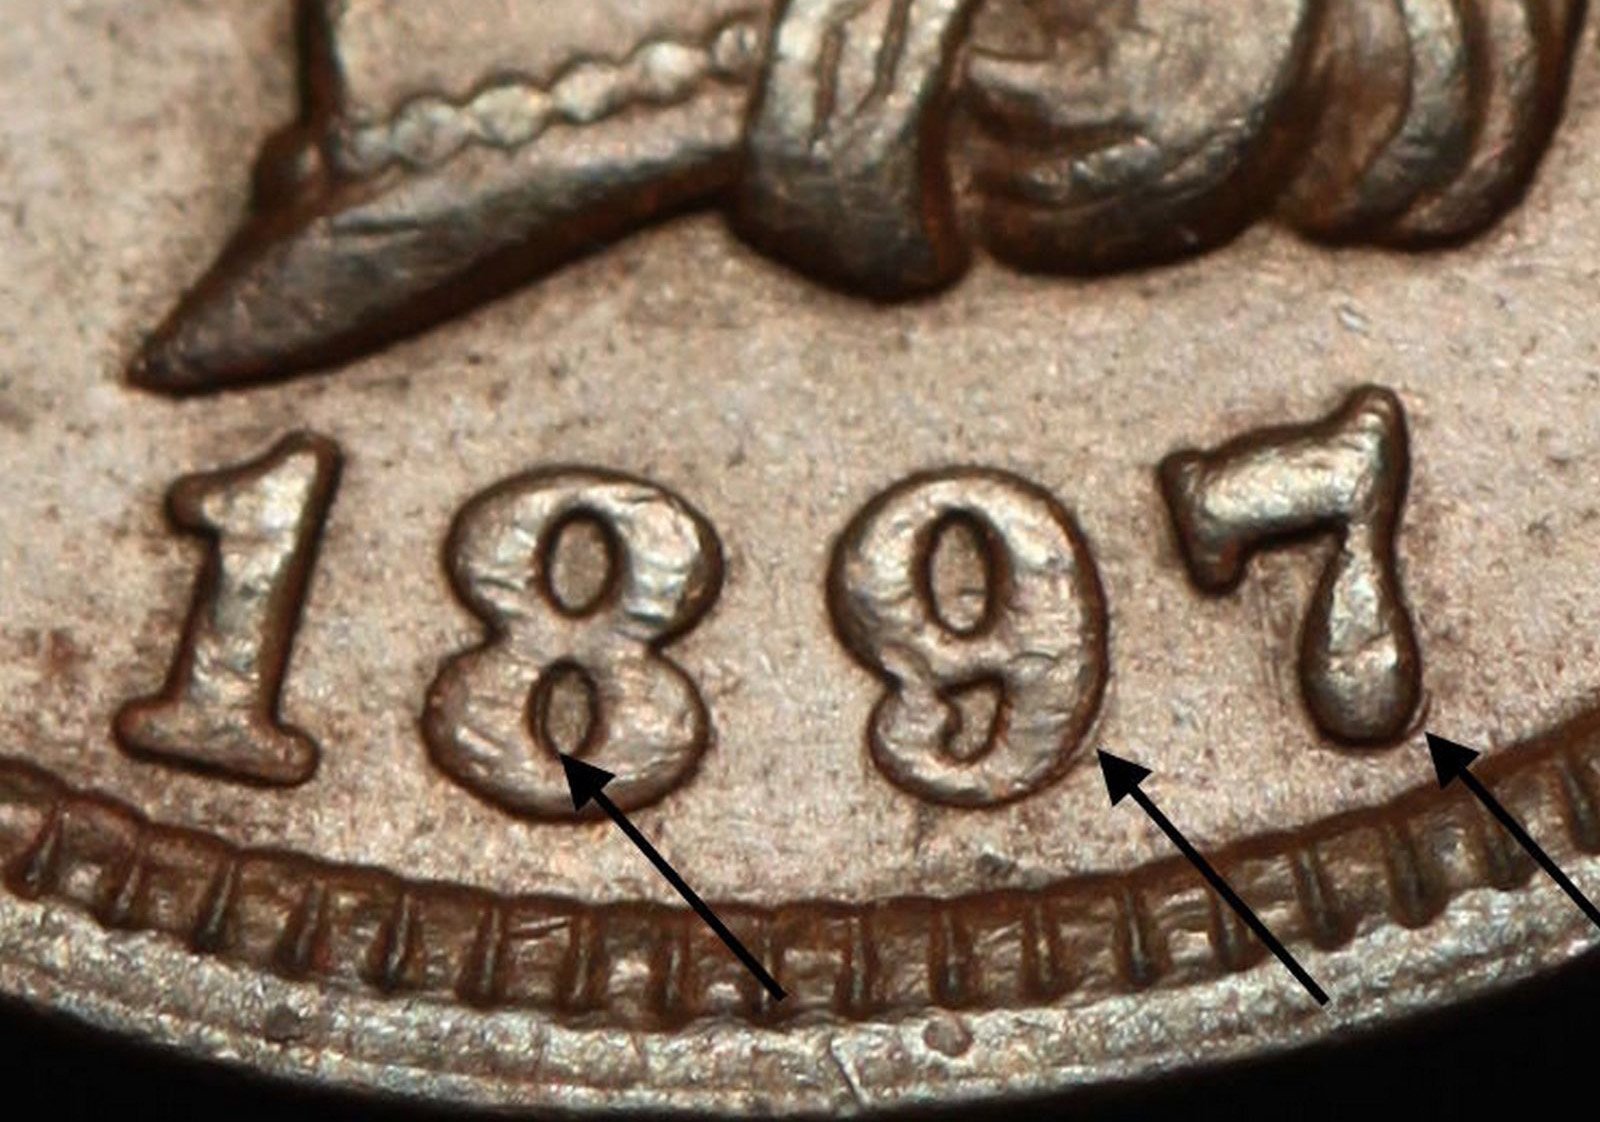 1897 RPD-013 - Indian Head Penny - Photo by Ed Nathanson